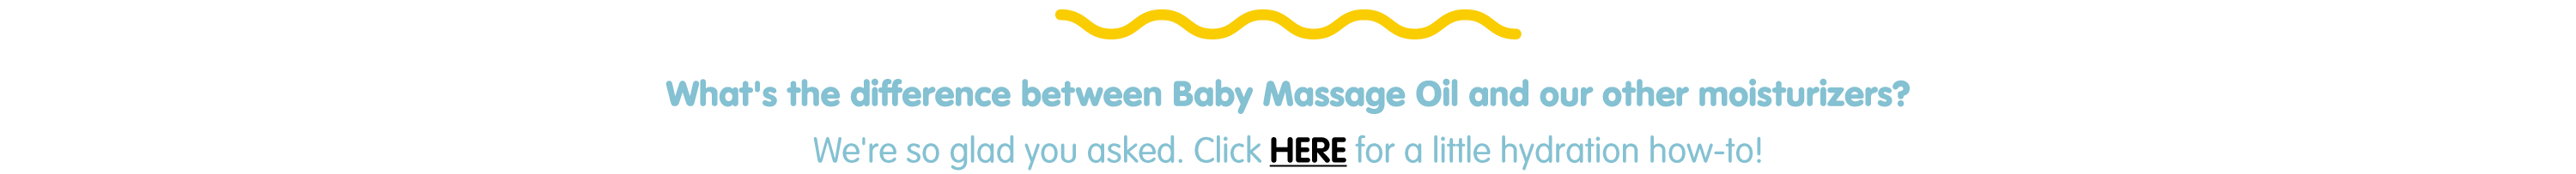 More info about Baby Massage Oil